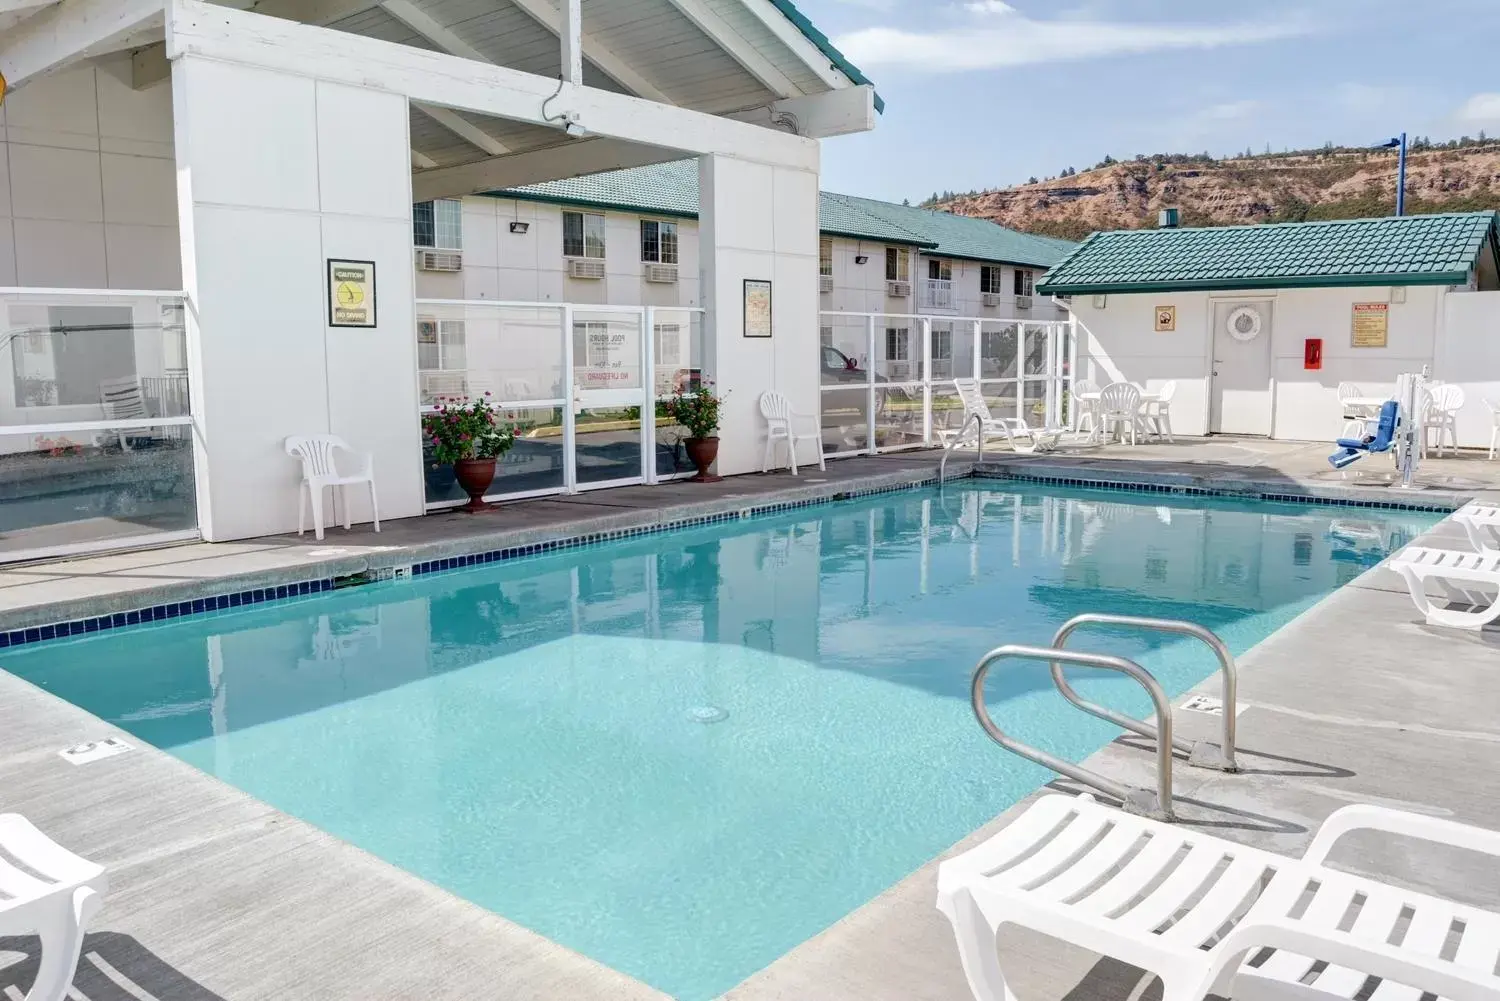 Swimming Pool in Motel 6-The Dalles, OR